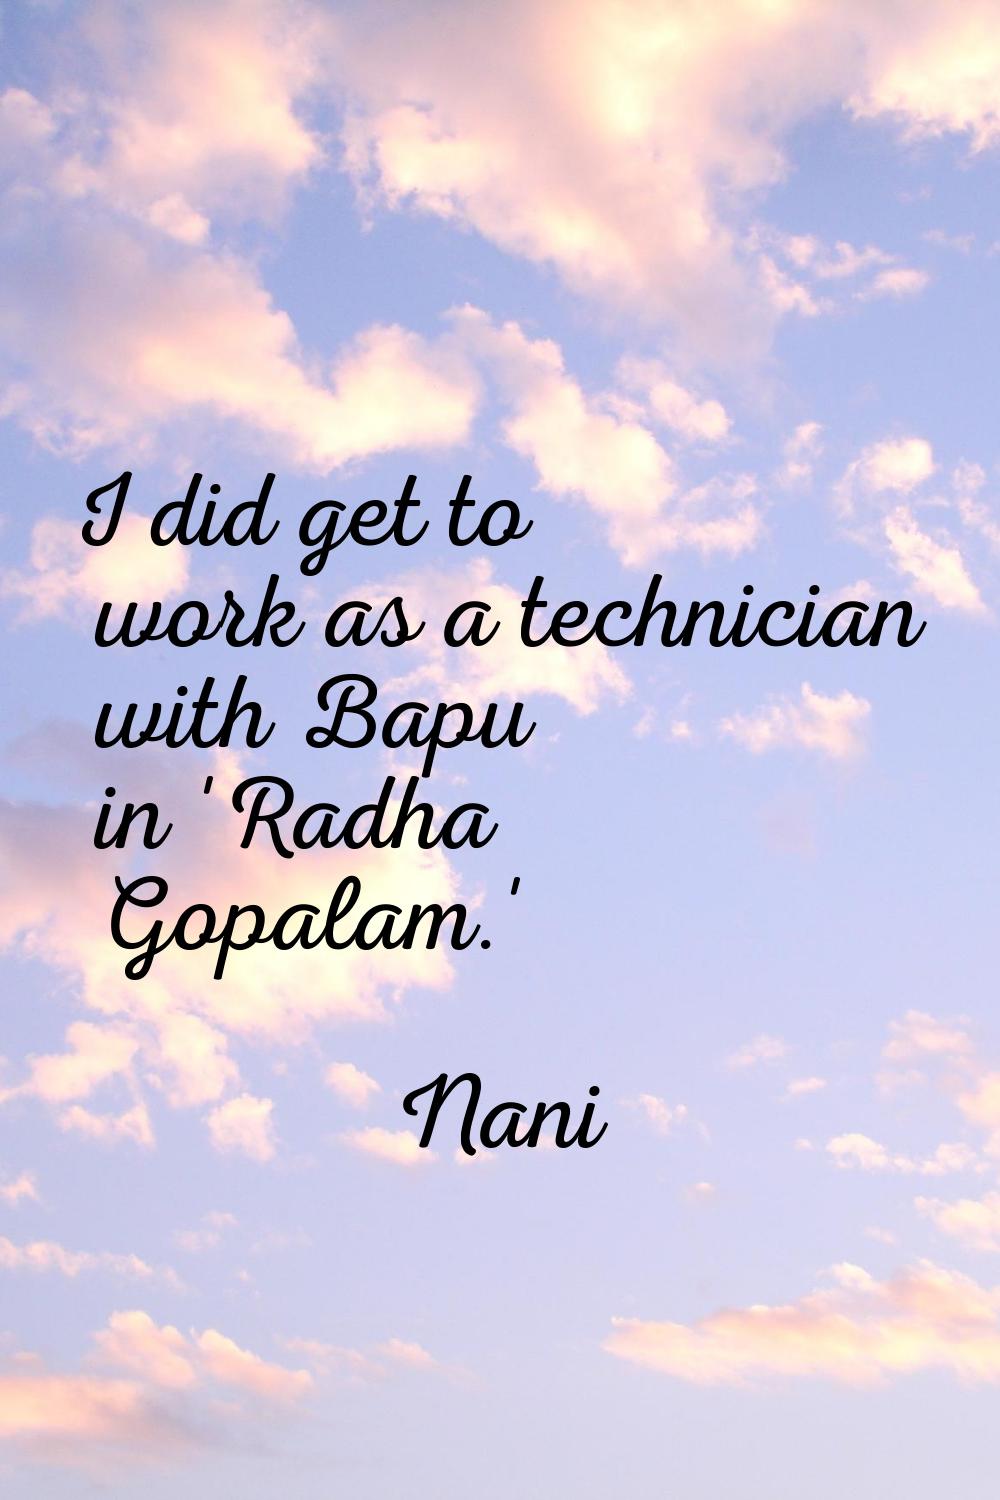 I did get to work as a technician with Bapu in 'Radha Gopalam.'